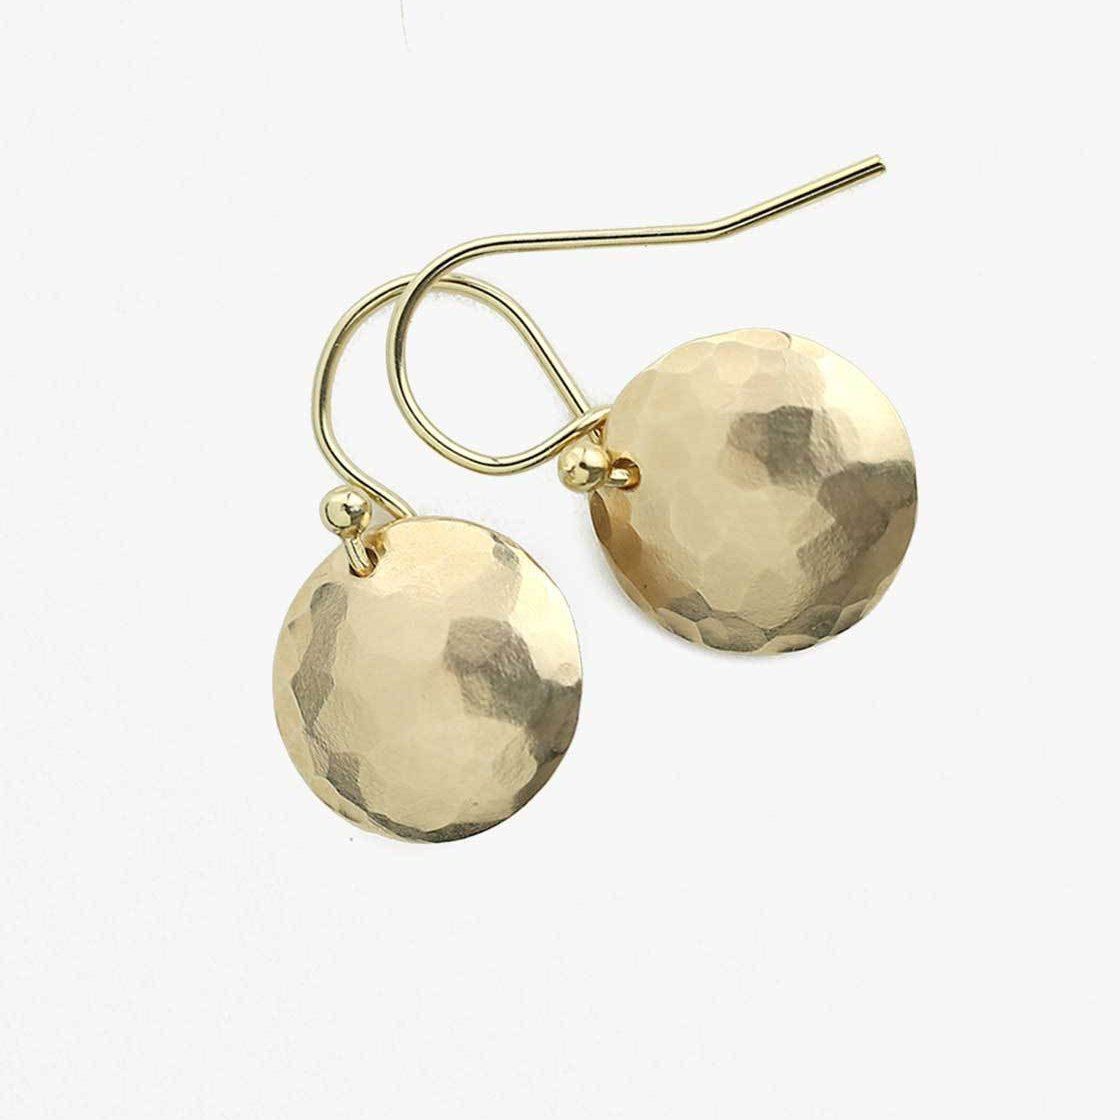 Medium Hammered Dome Earrings - Gold Filled or Sterling Silver - Handmade Jewelry by Burnish